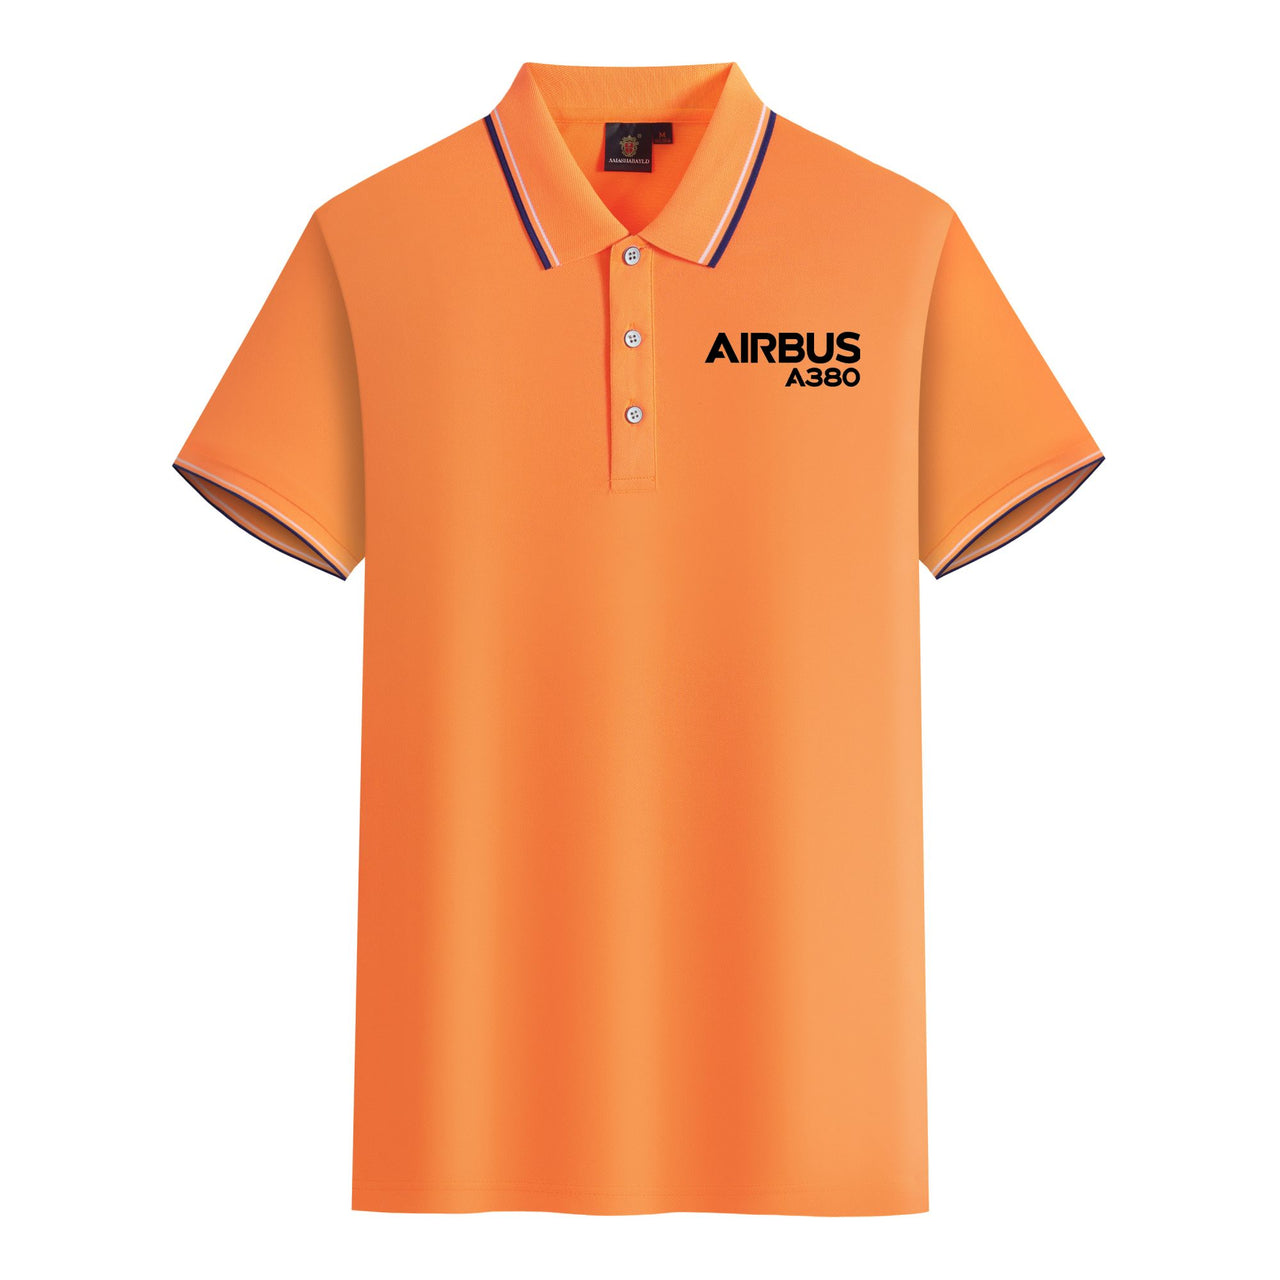 Airbus A380 & Text Designed Stylish Polo T-Shirts